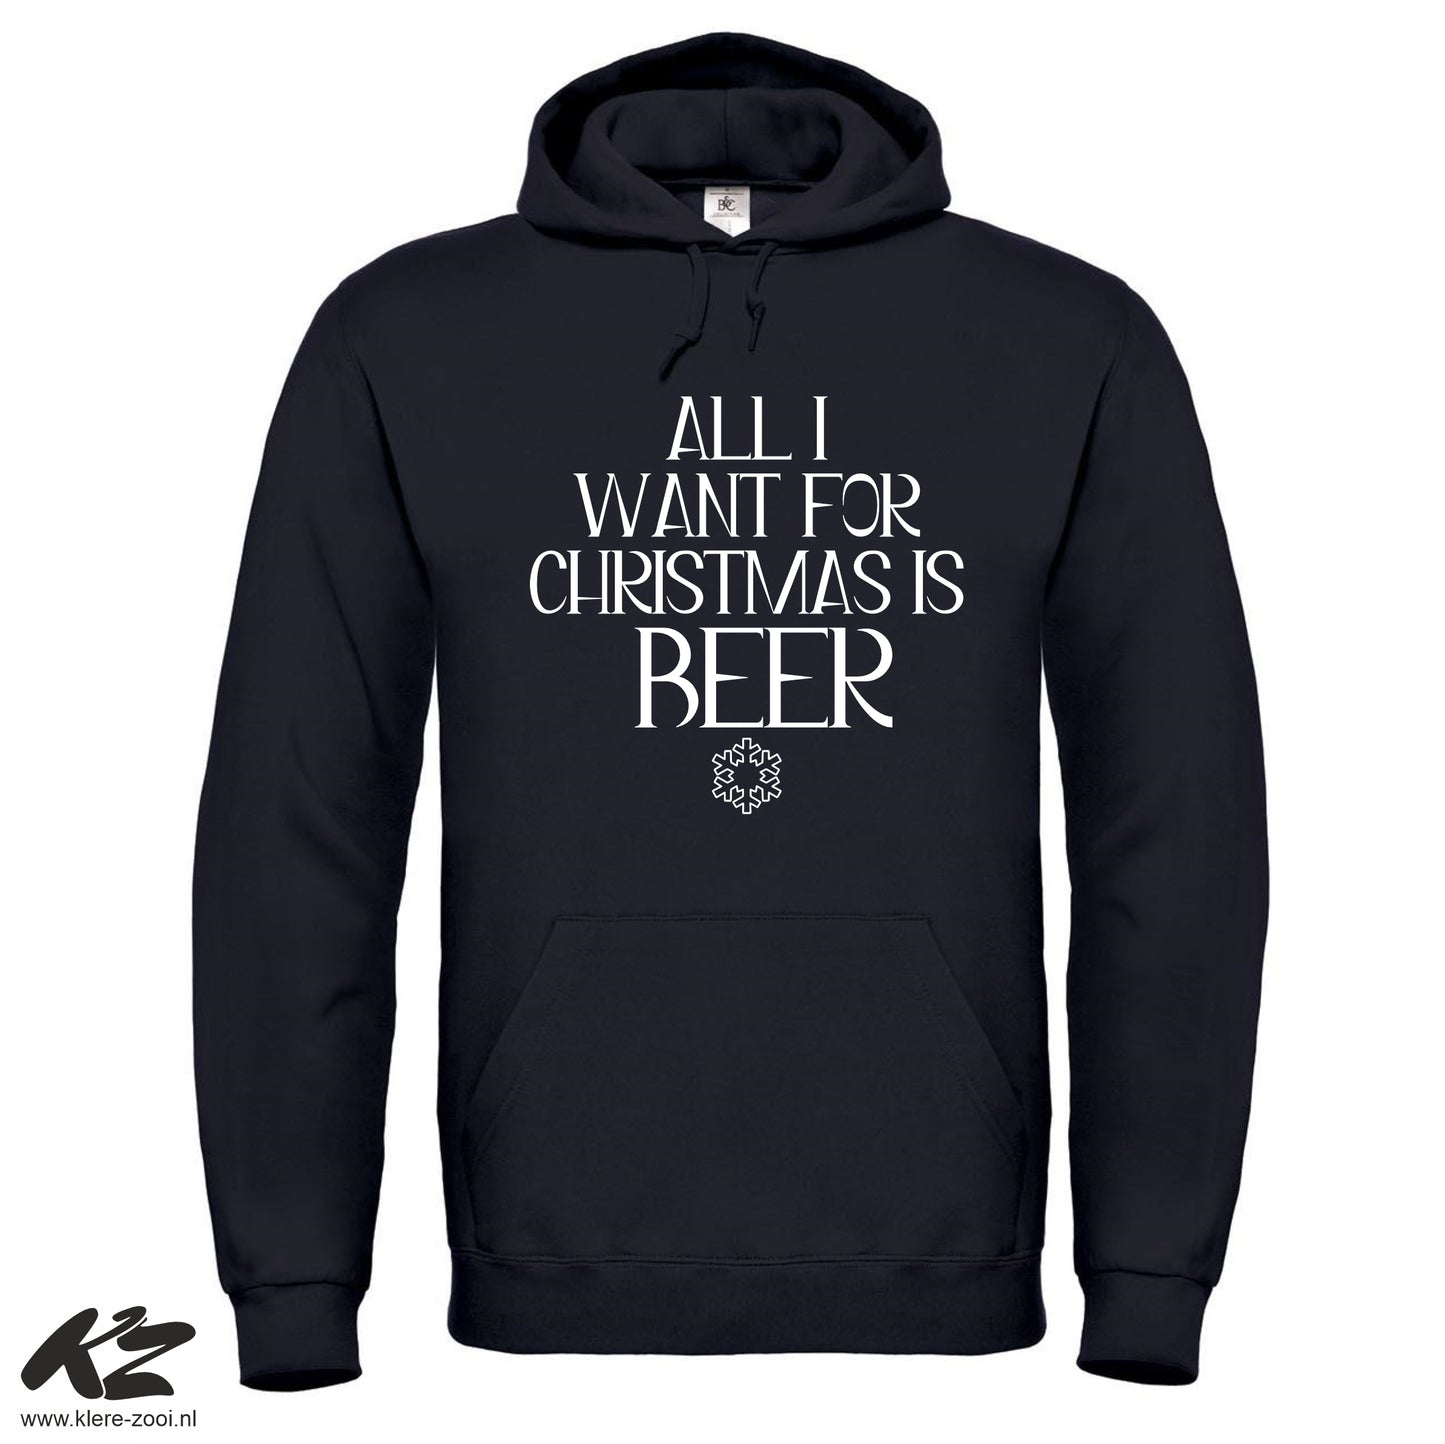 All I Want for Christmas is Beer